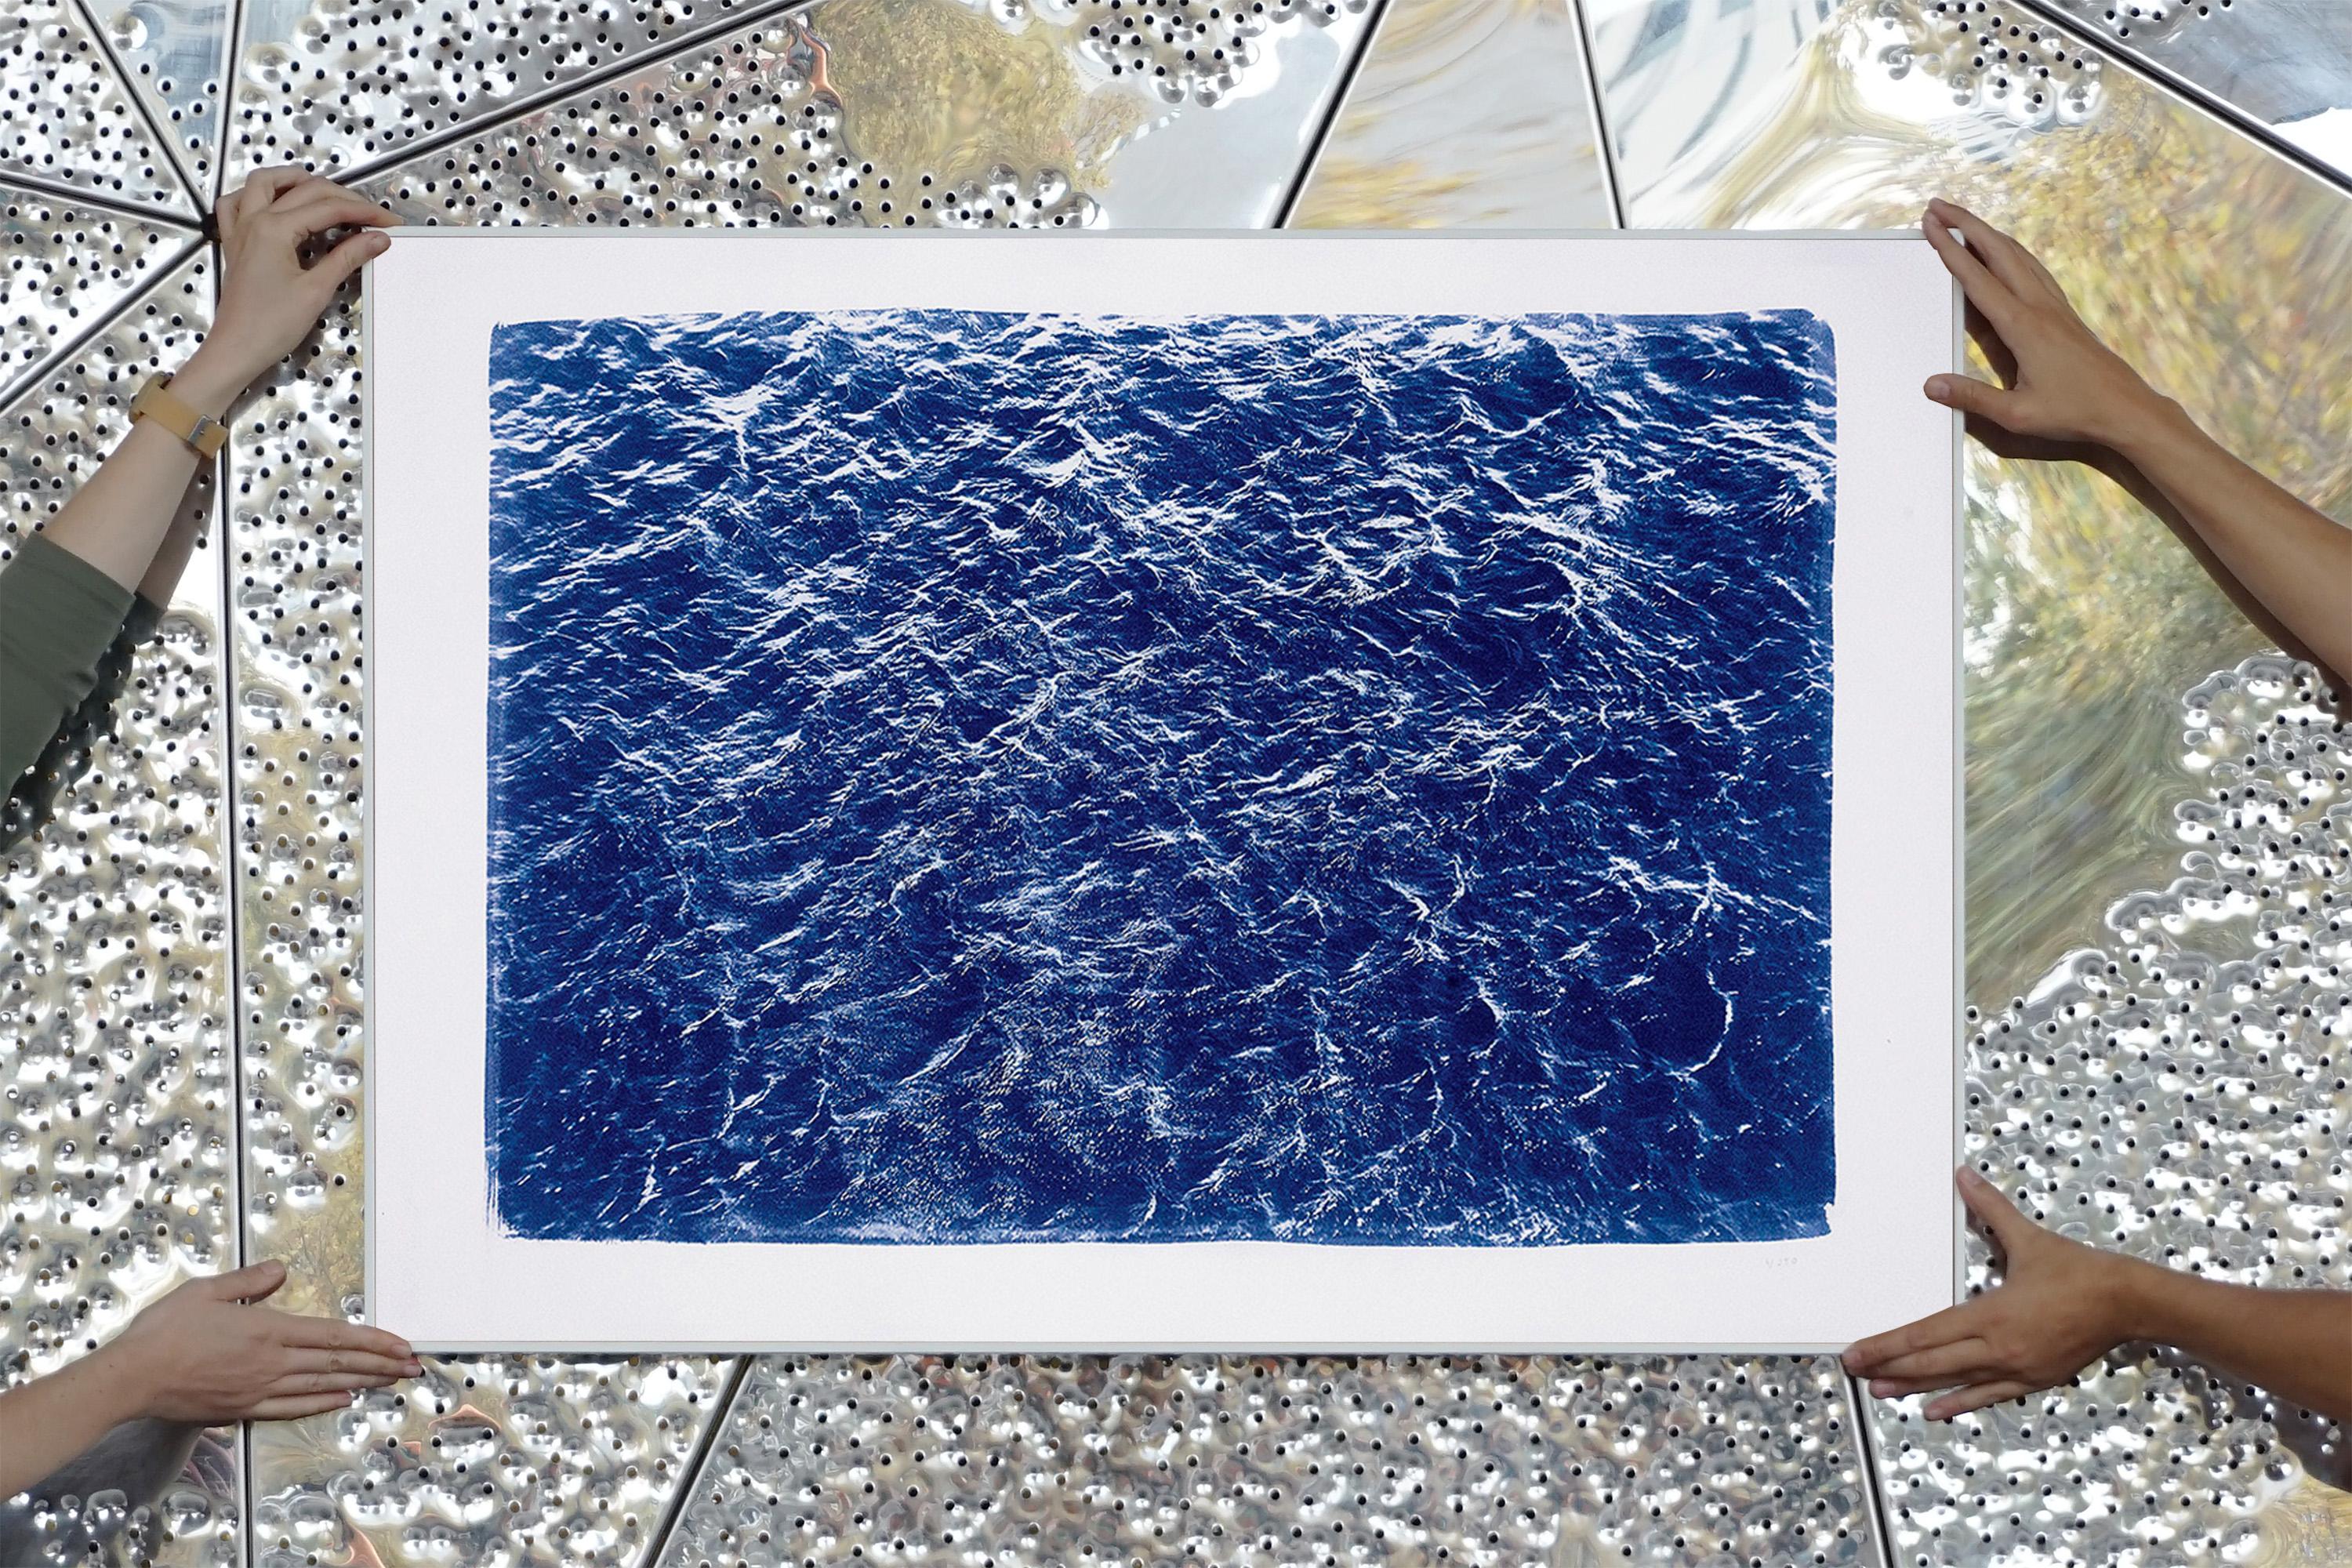 Pacific Ocean Currents, Cyanotype on Watercolor Paper, White Border, 100x70cm - Realist Print by Kind of Cyan